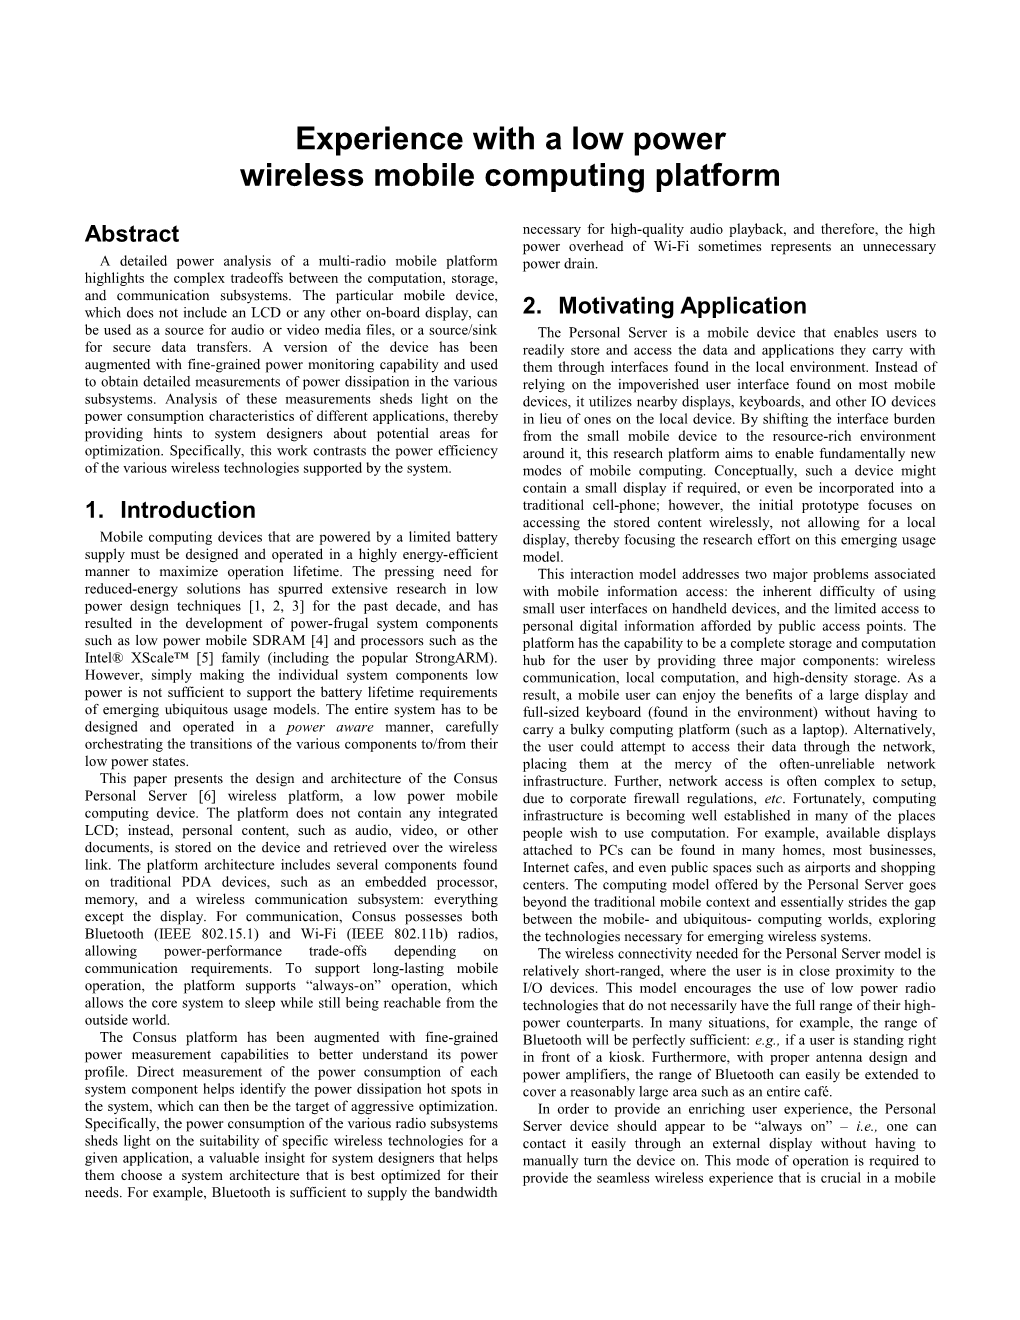 Experience with a Low Power Wireless Mobile Computing Platform